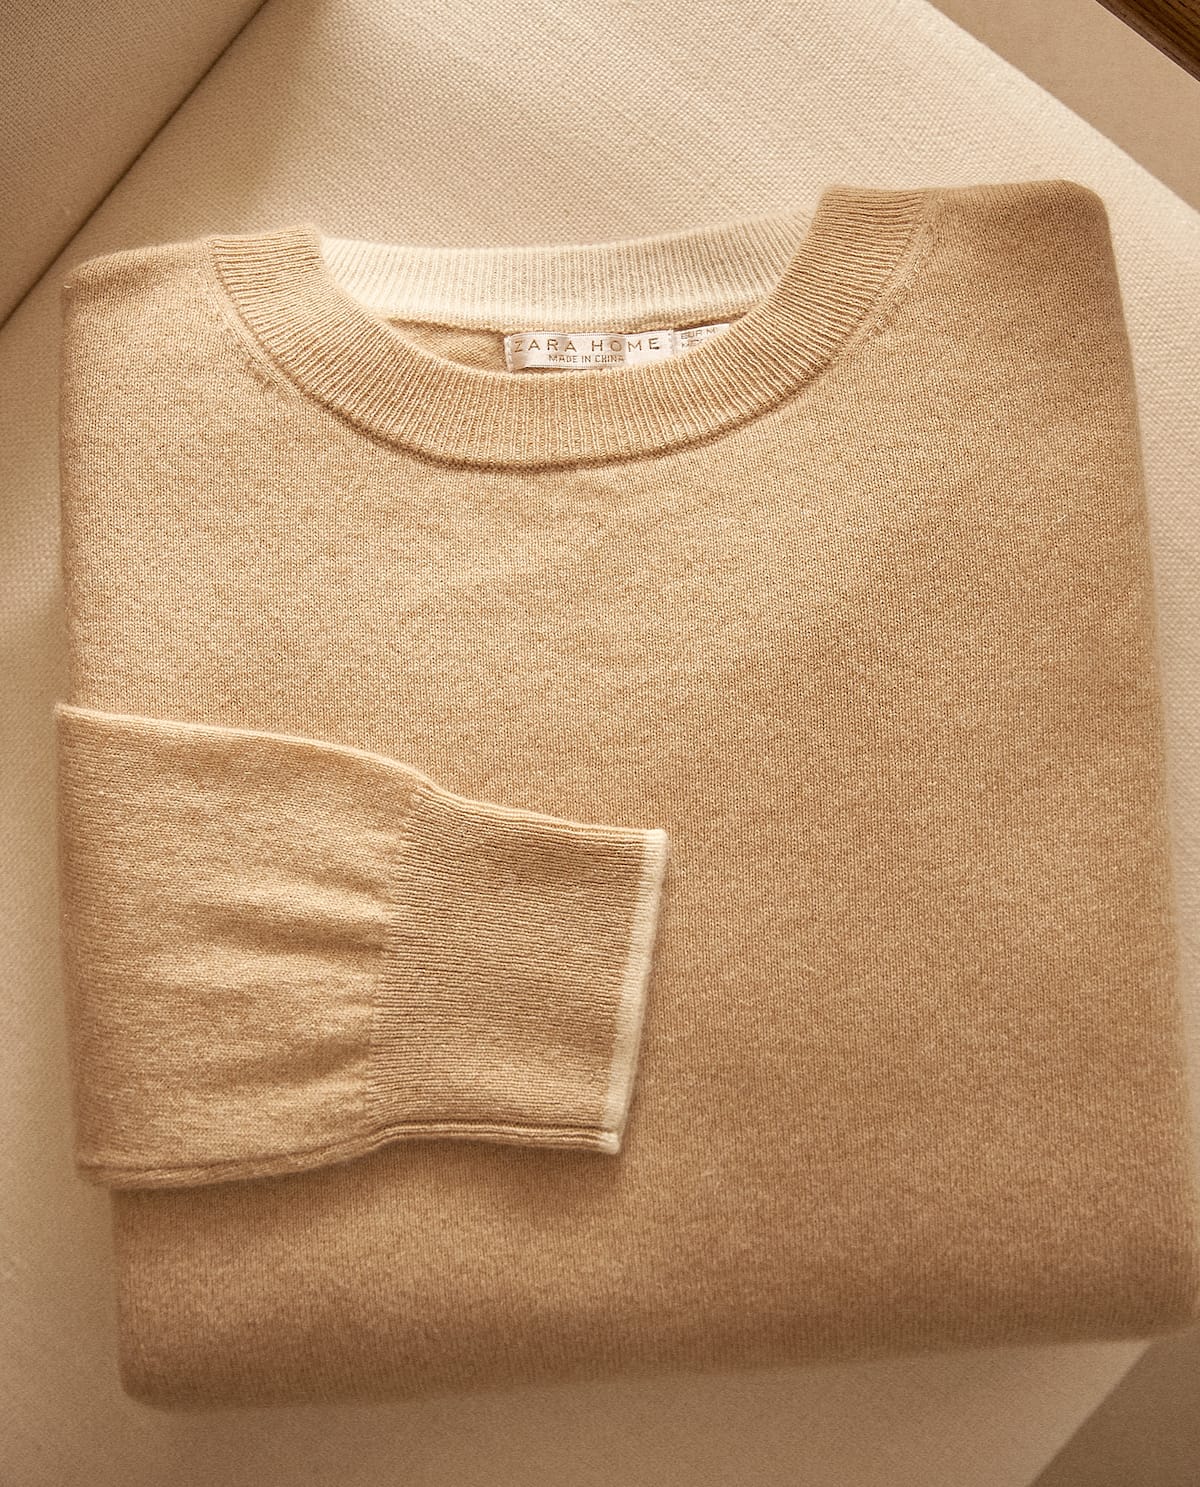 Zara Home has the sweater you needed for this winter, to be at home comfortably or leave the marking style is possible